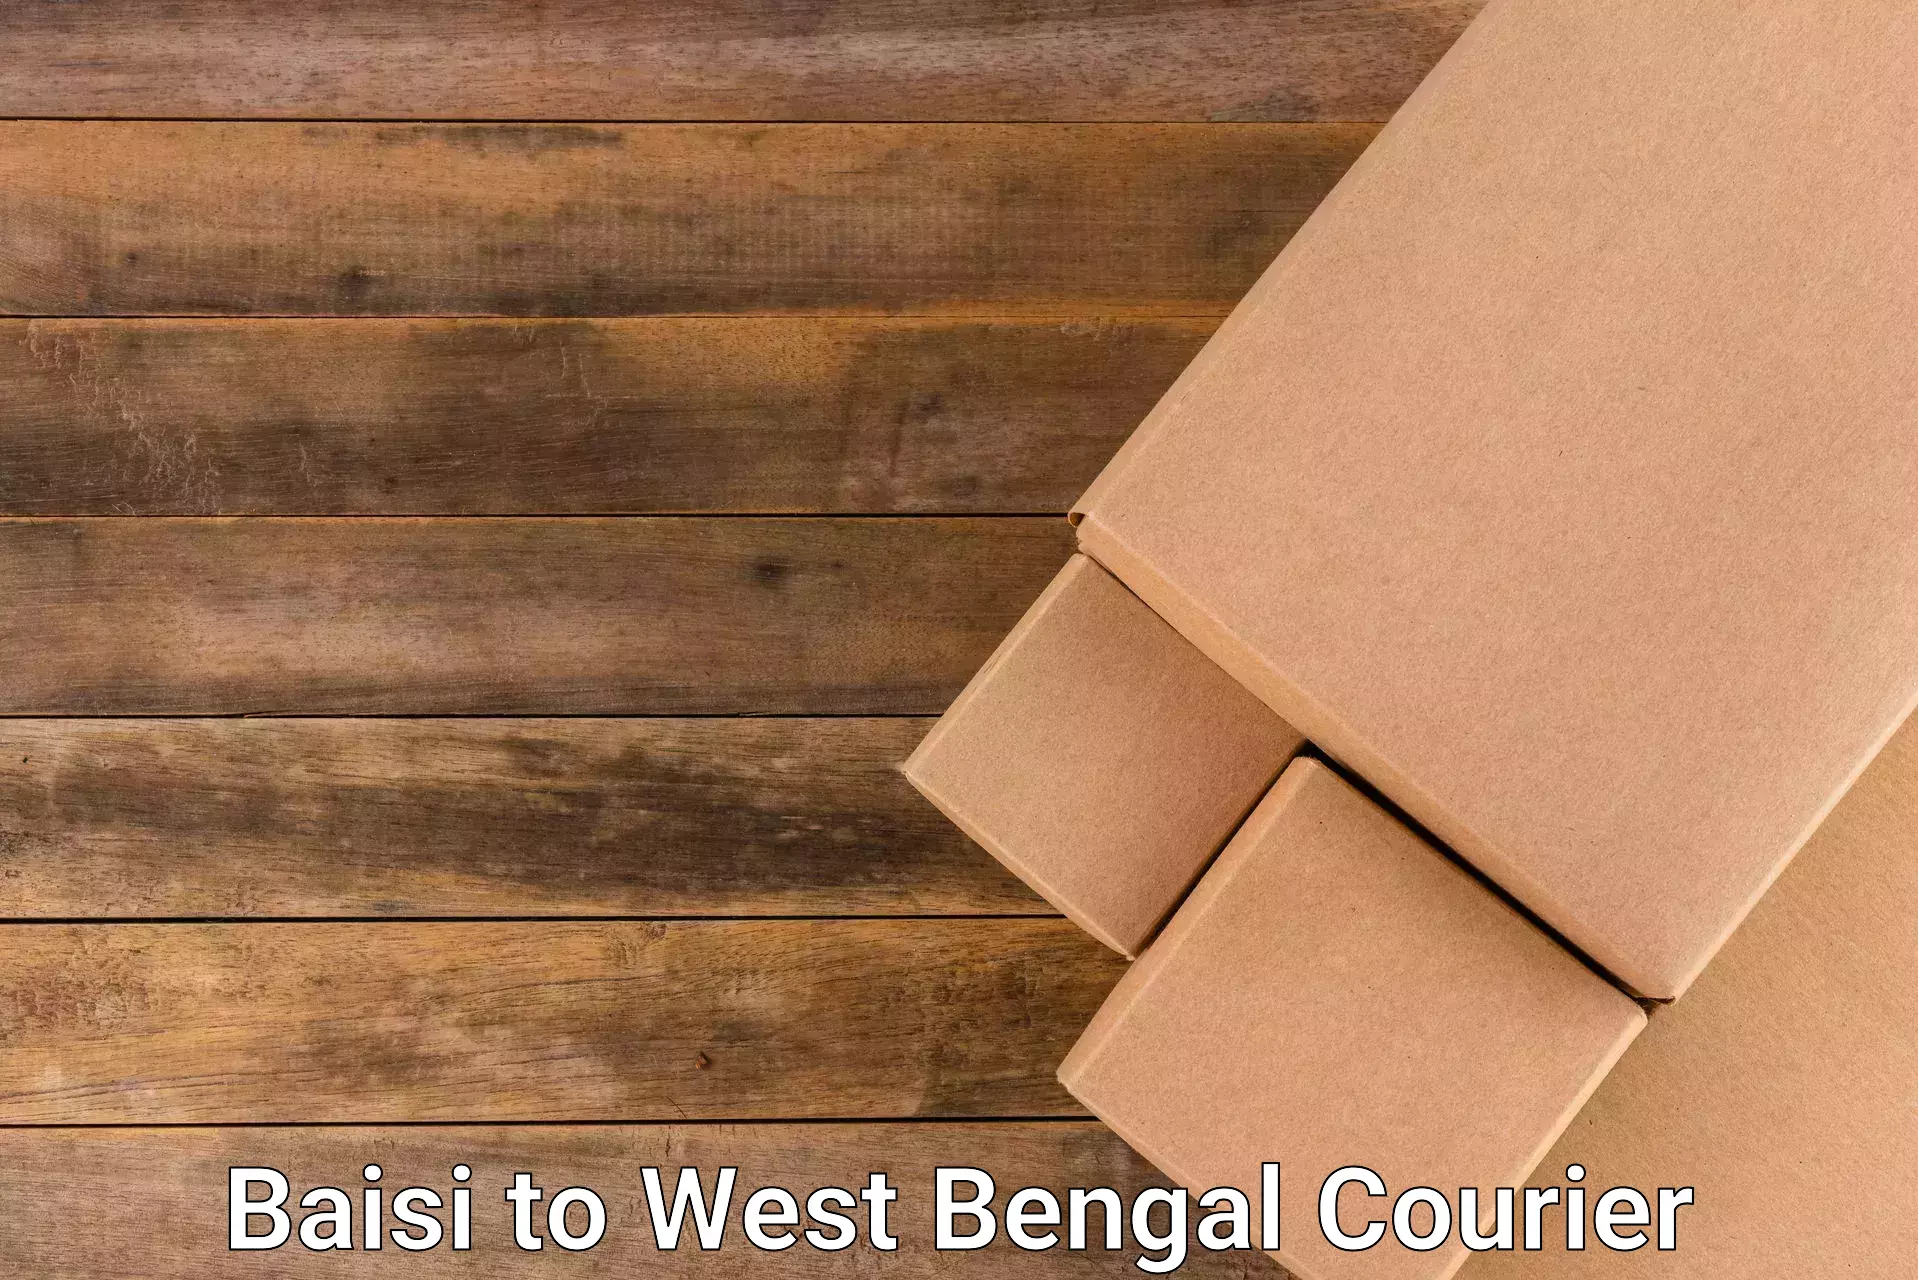 Reliable delivery network Baisi to Dakshin Barasat